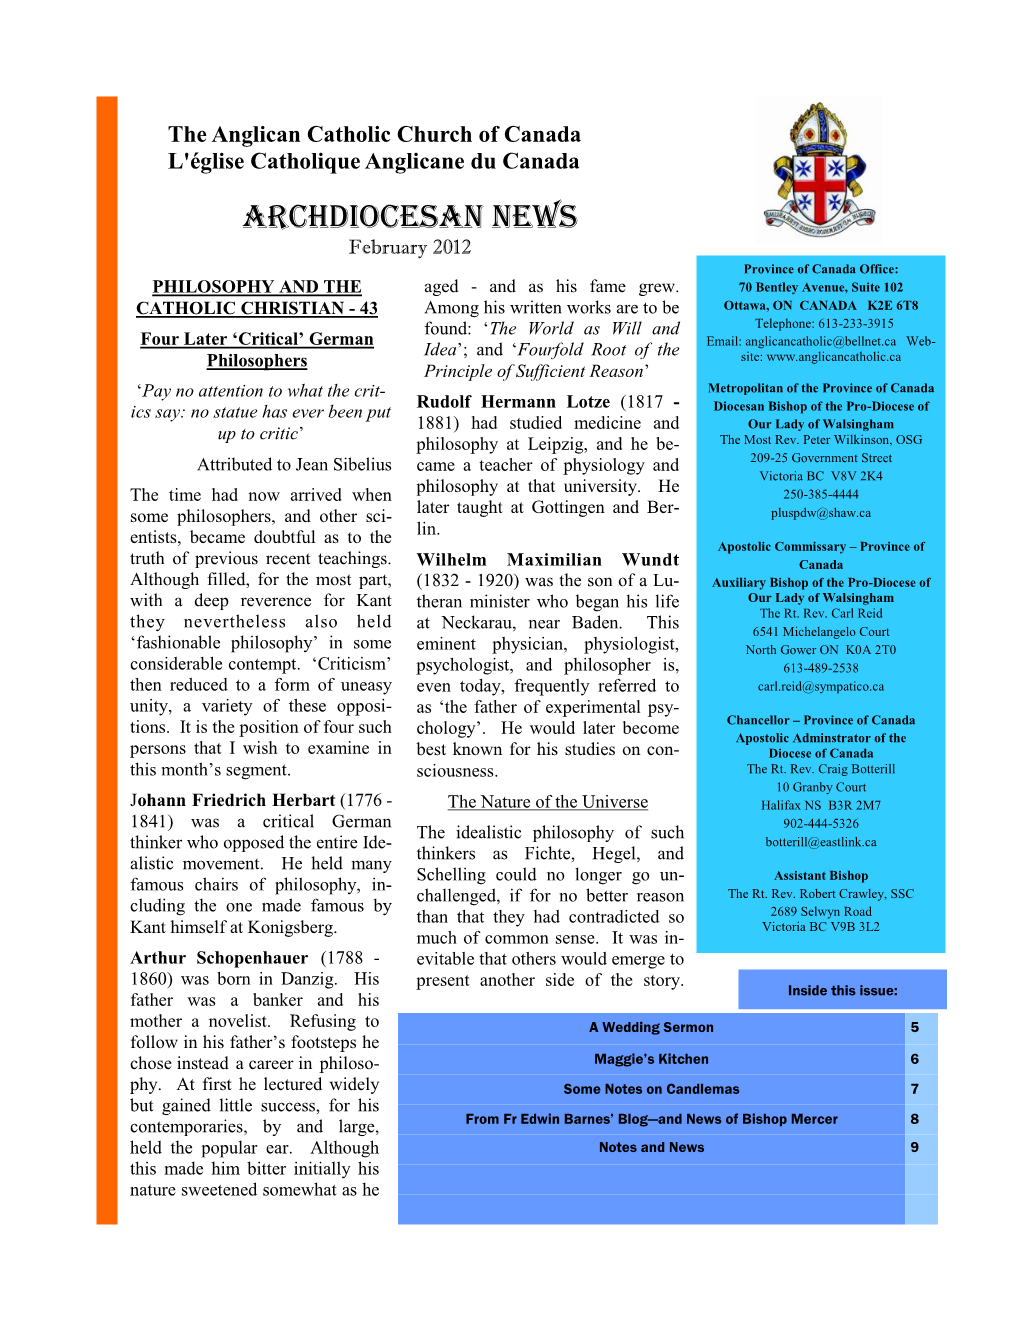 Archdiocesan News February 2012 Province of Canada Office: PHILOSOPHY and the Aged - and As His Fame Grew